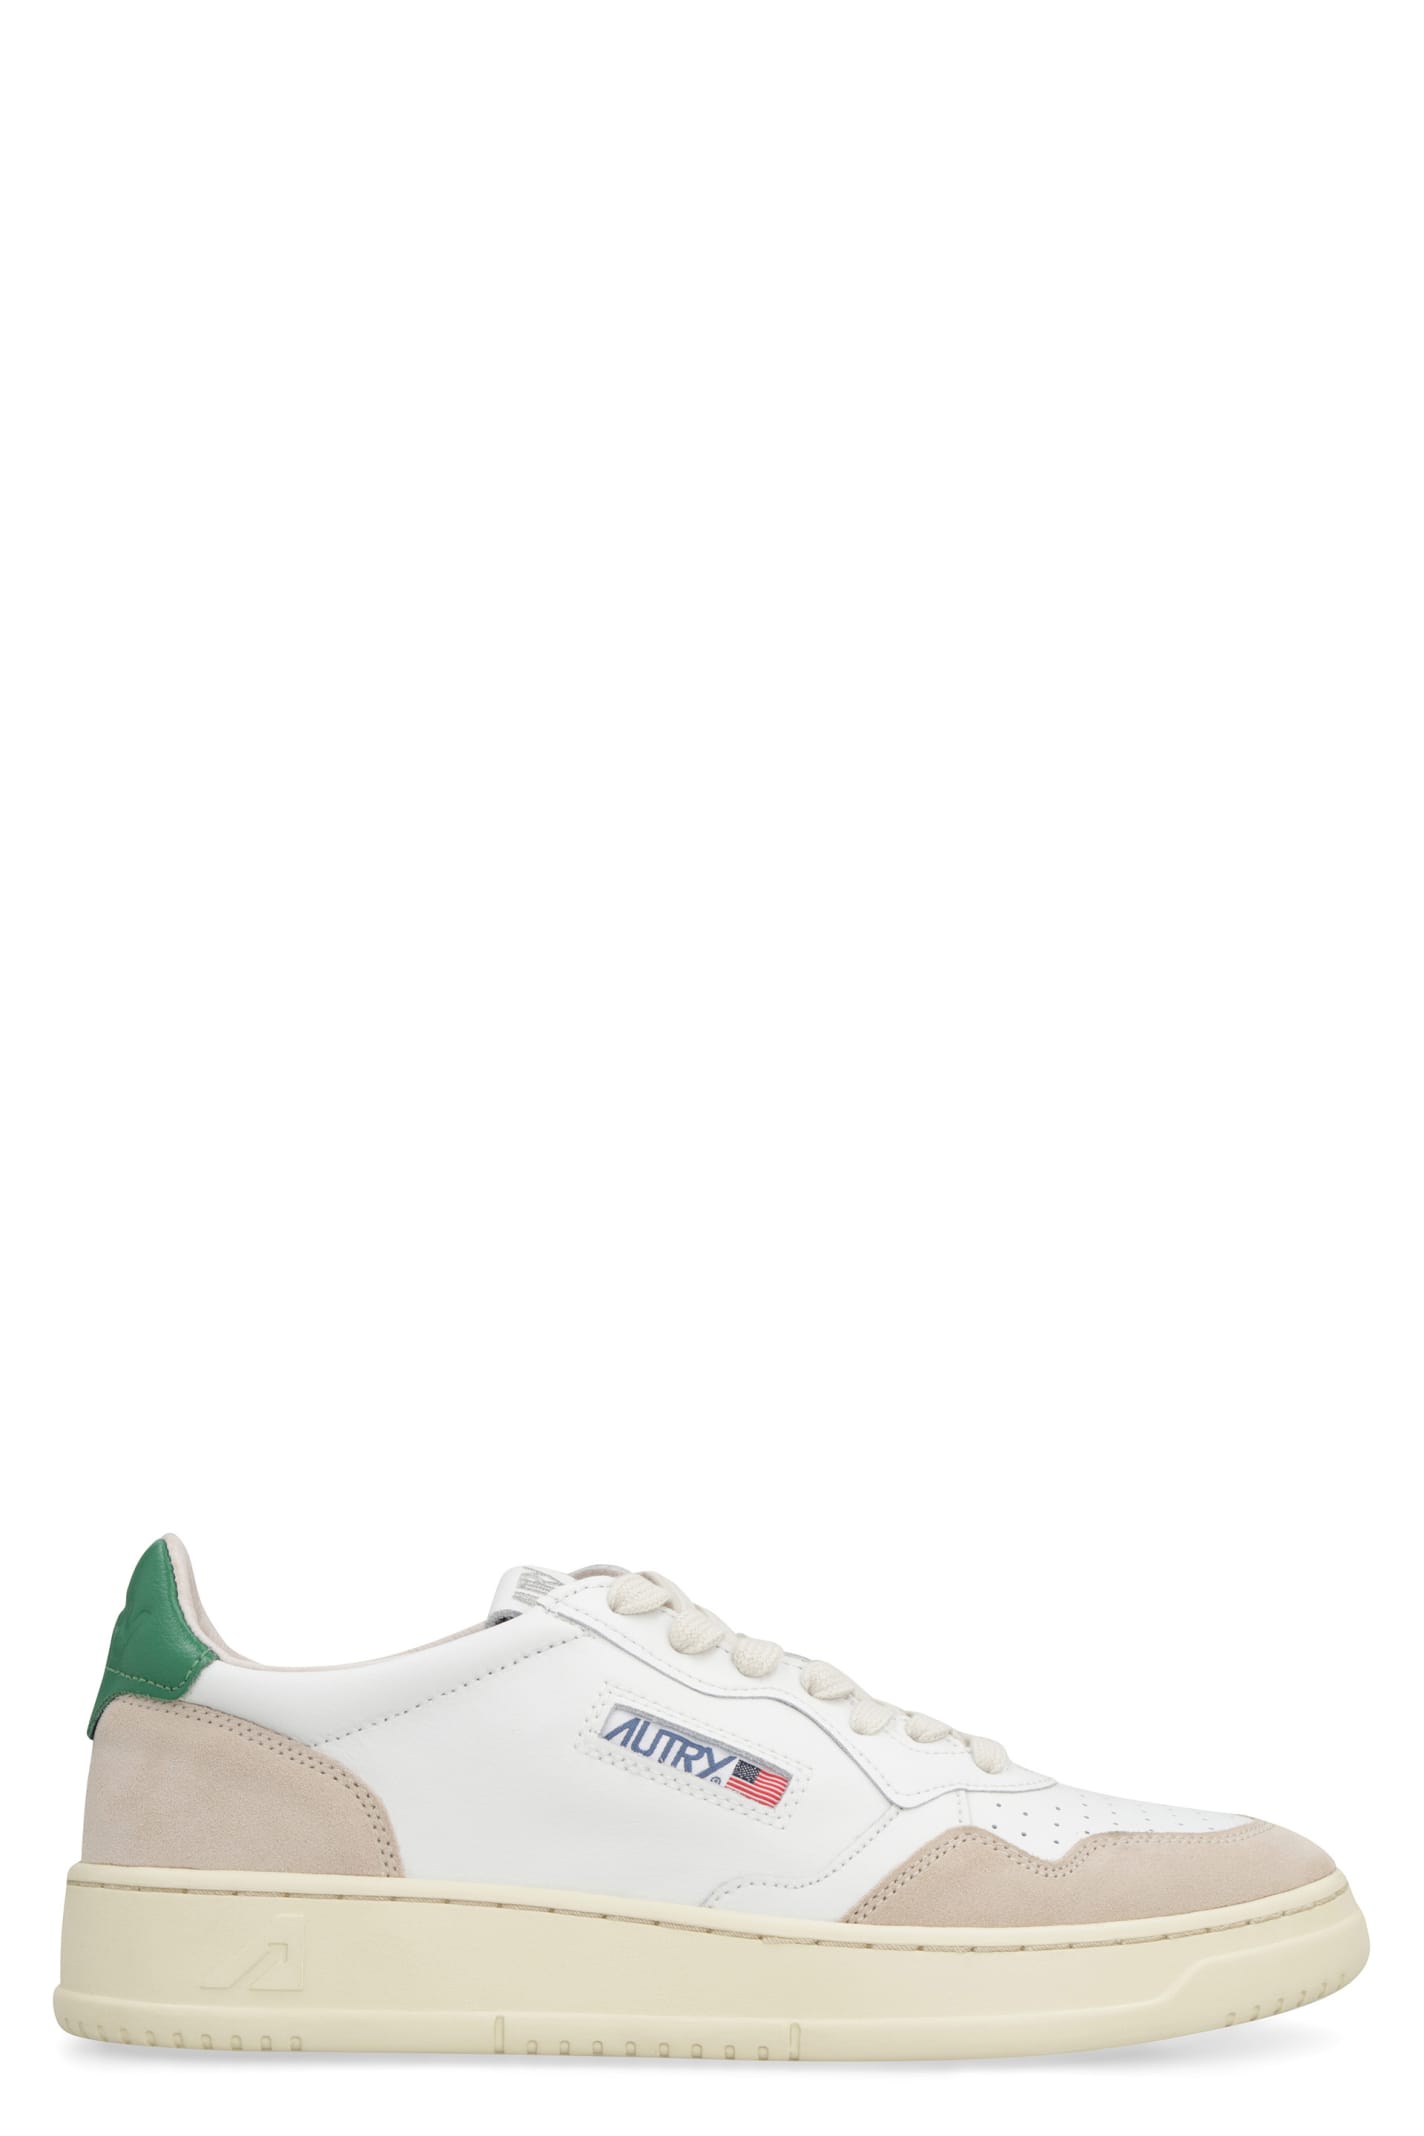 Autry Medalist Leather Low-top Sneakers